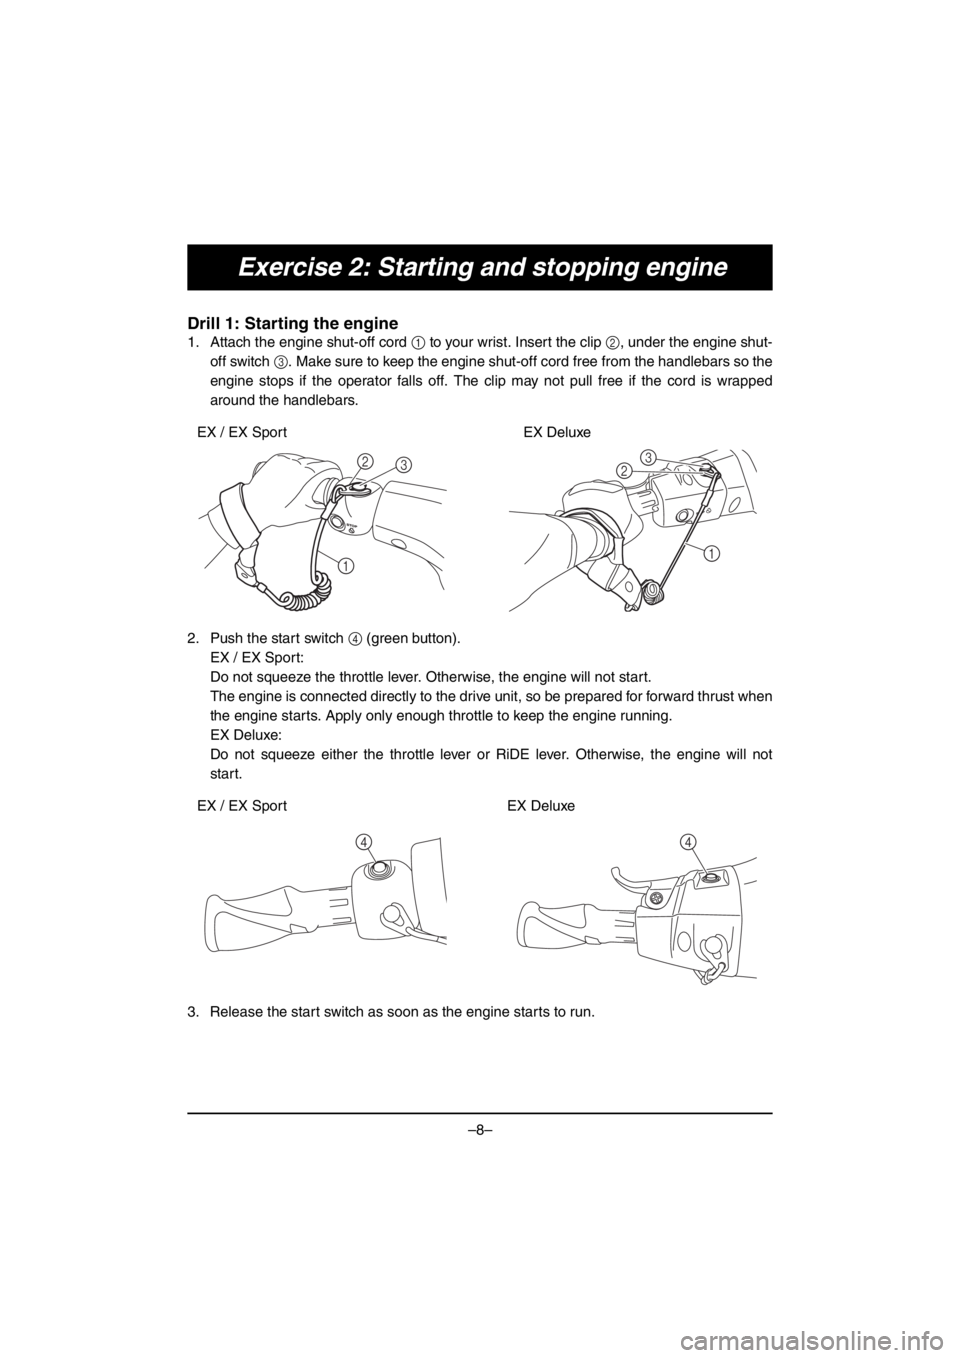 YAMAHA EX 2017  Manuale duso (in Italian) –8–
Exercise 2: Starting and stopping engine
Drill 1: Starting the engine
1. Attach the engine shut-off cord 1 to your wrist. Insert the clip 2, under the engine shut-
off switch 3. Make sure to k